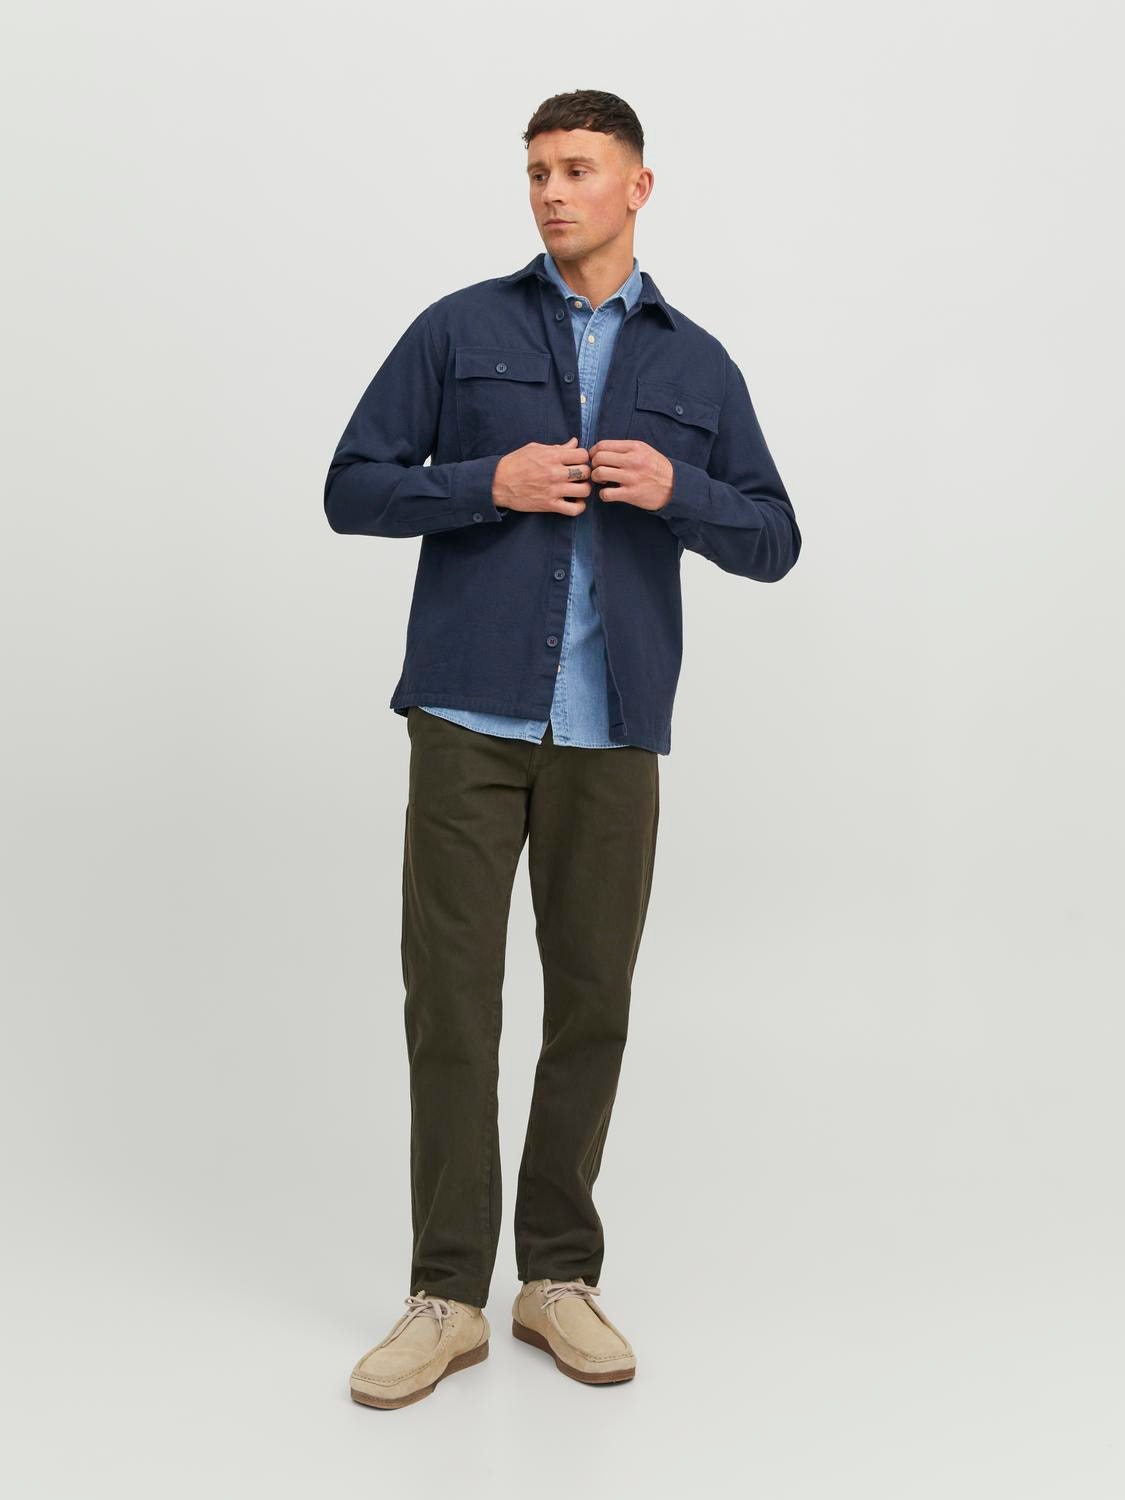 Jack & Jones RDD Giacca camicia Wide Fit -Ombre Blue - 12243509